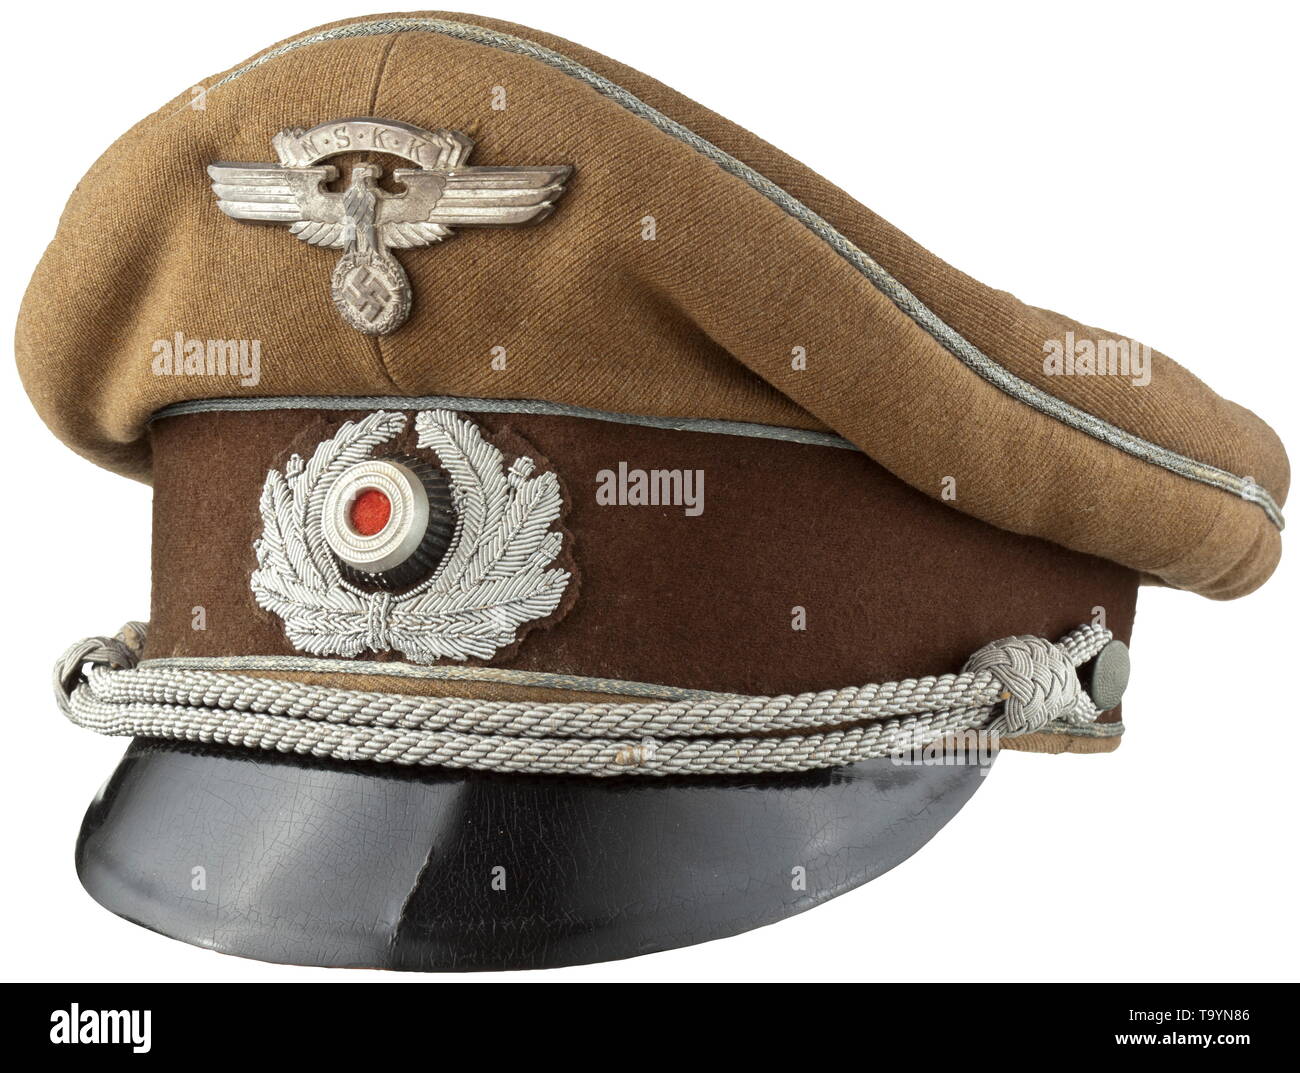 A visor cap for NSKK officers on wartime missions Private purchase piece in olive-coloured cloth, dark-brown trim band, silver officer's braid, yellow silk liner (cap trapezoid missing), brown leather sweatband with Erel maker marking, hand embroidered cap wreath, metal NSKK eagle and cockade, officer's cording. historic, historical, 20th century, Additional-Rights-Clearance-Info-Not-Available Stock Photo